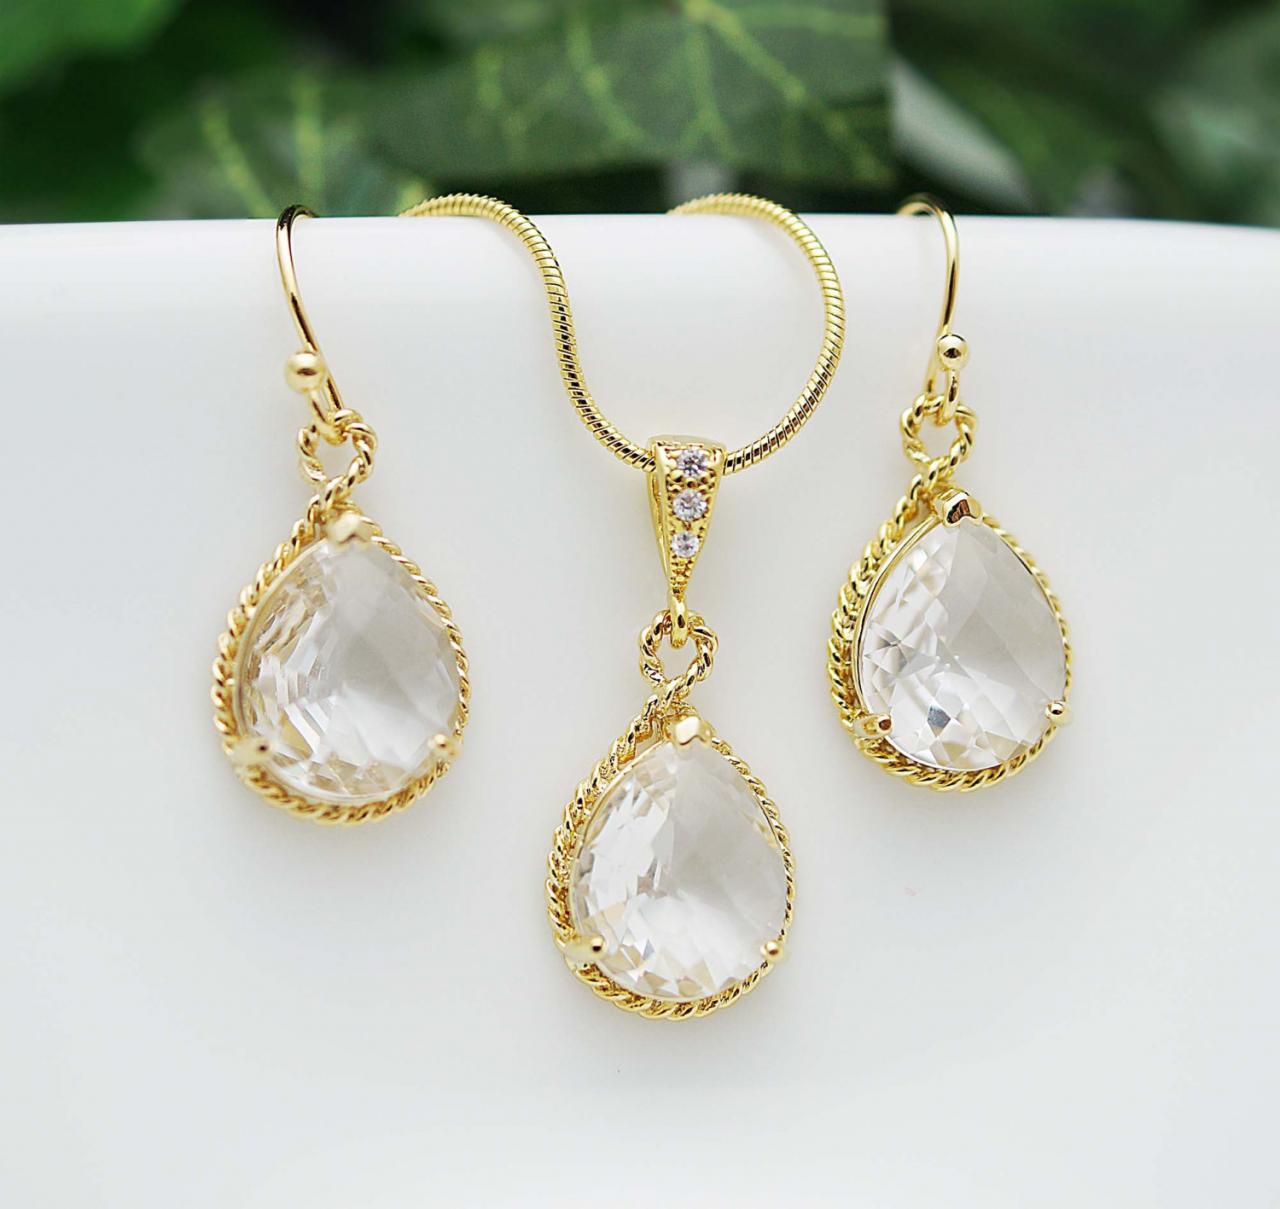 Wedding Jewelry Bridesmaid Jewelry Bridesmaid Earrings Bridesmaid Necklace Clear Glass Gold Trimmed Pear Cut Bridesmaid Gift